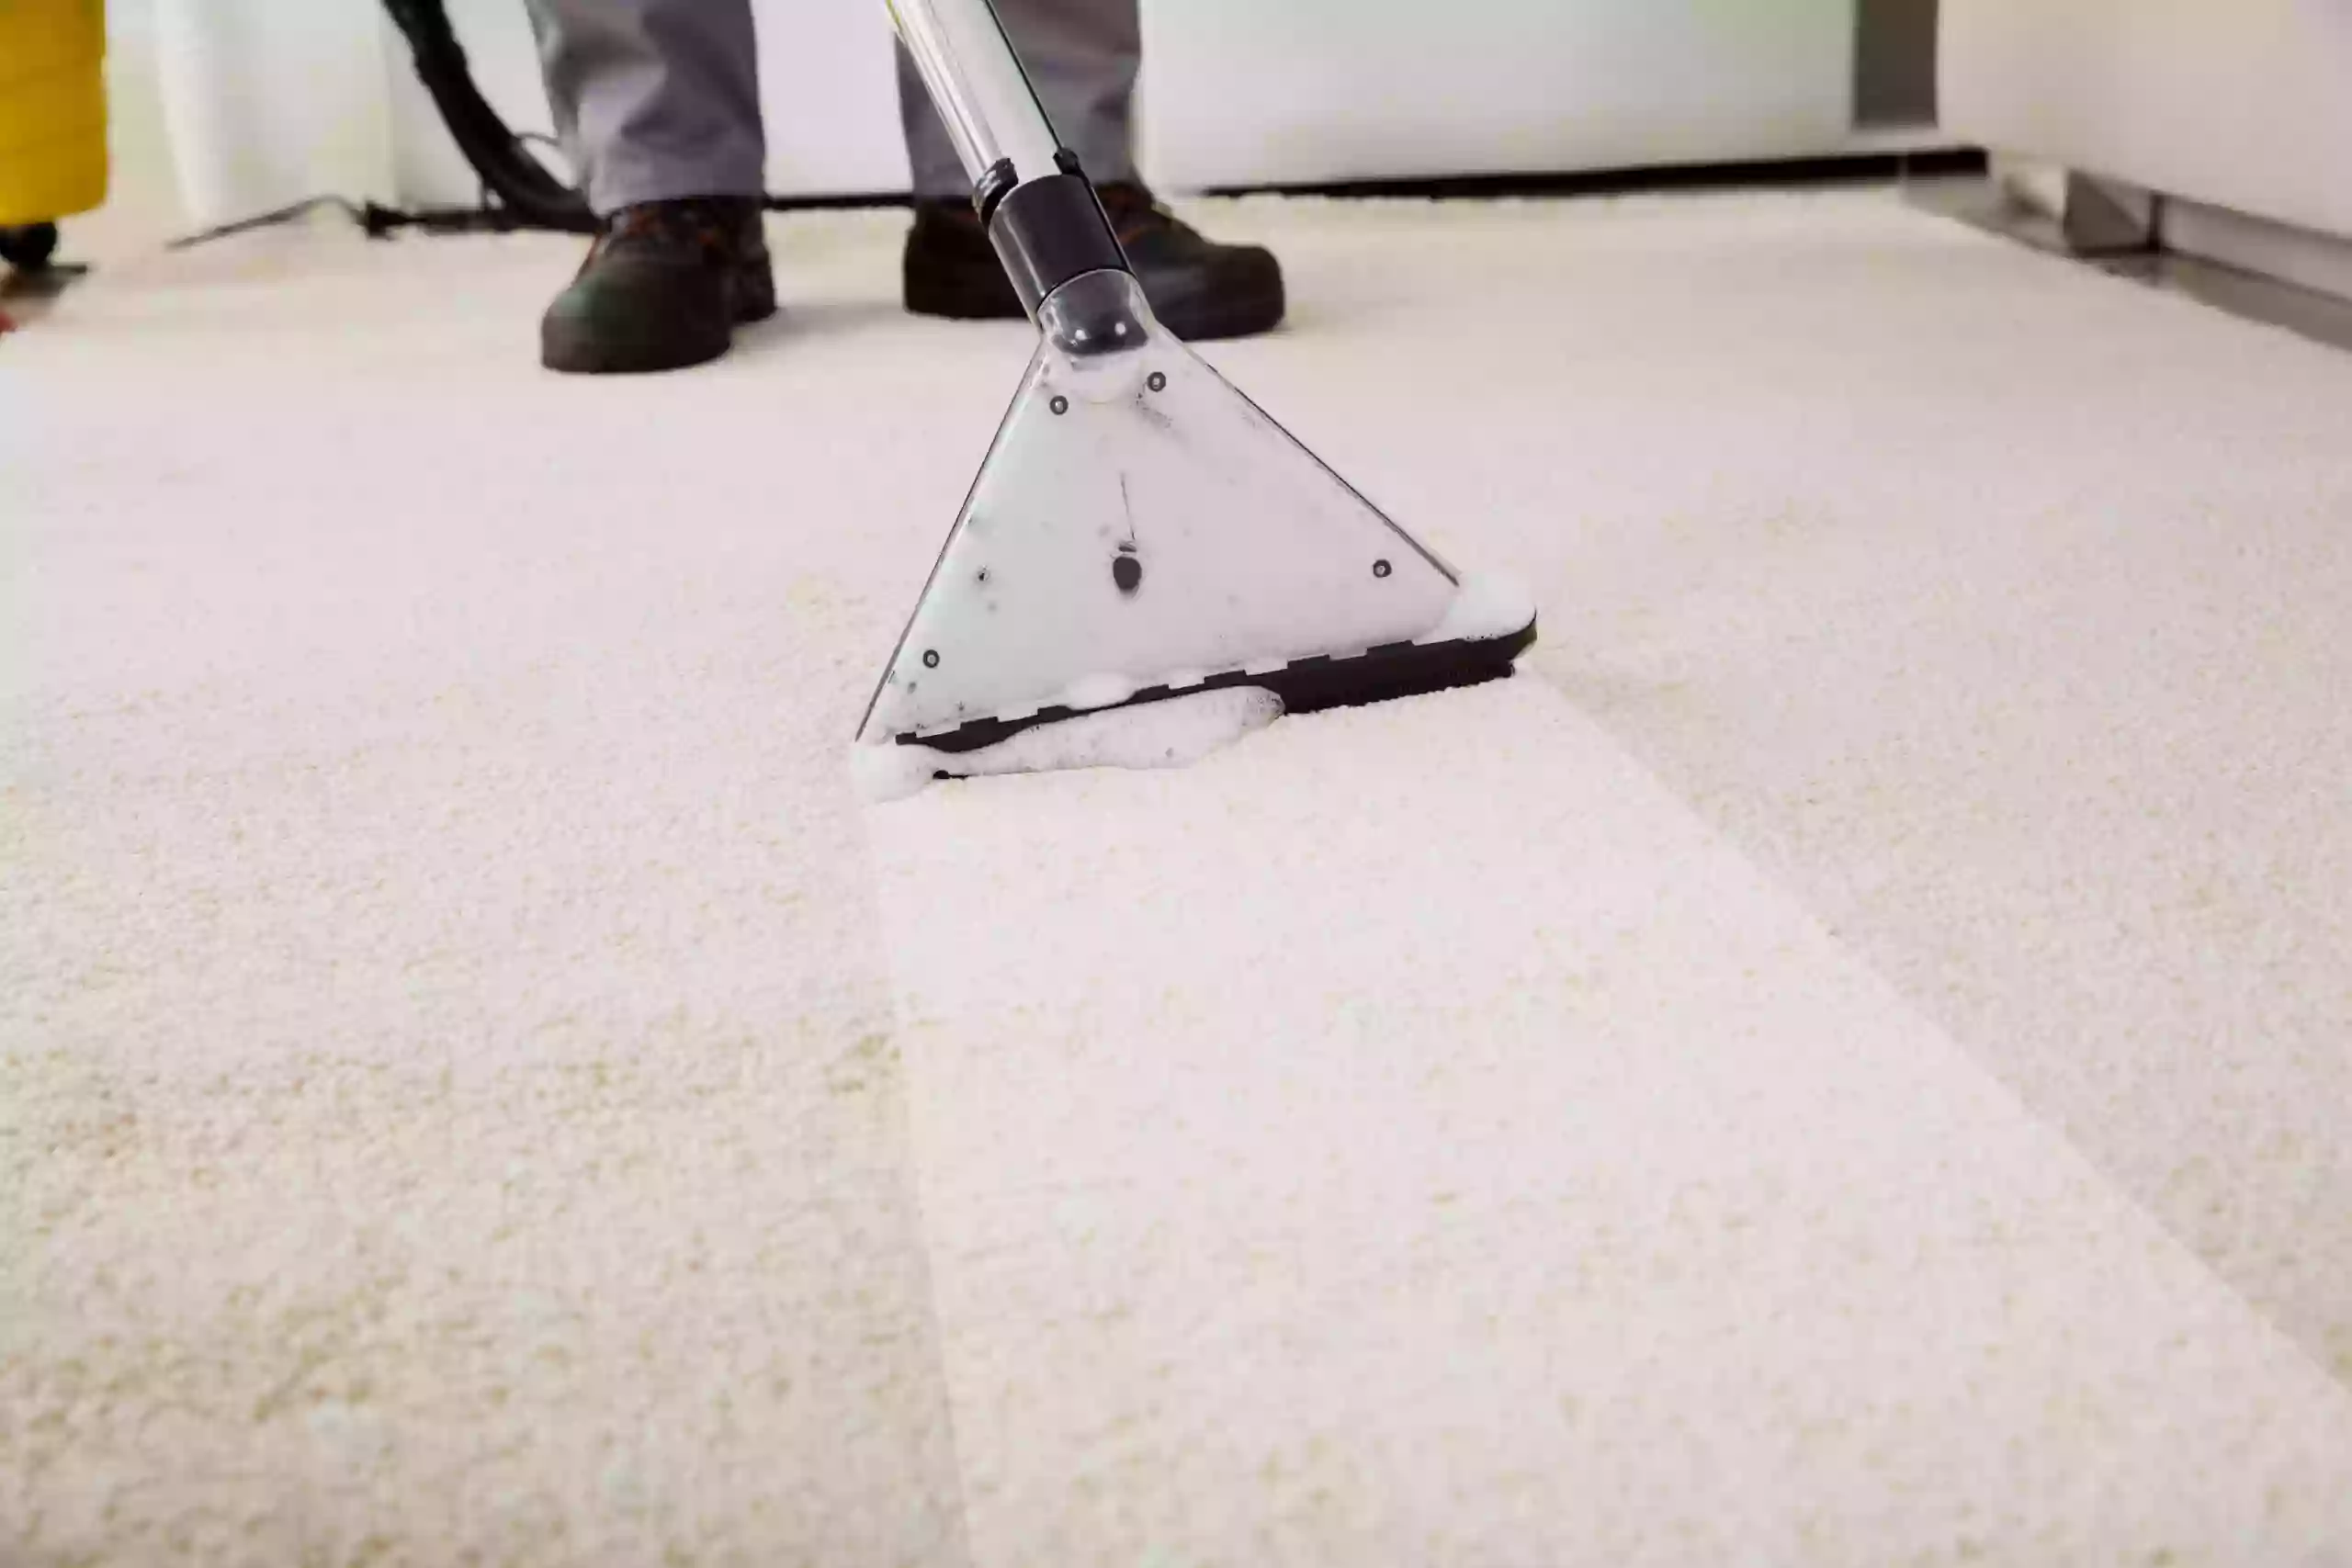 Cleaning Mate Carpet Cleaning Brisbane